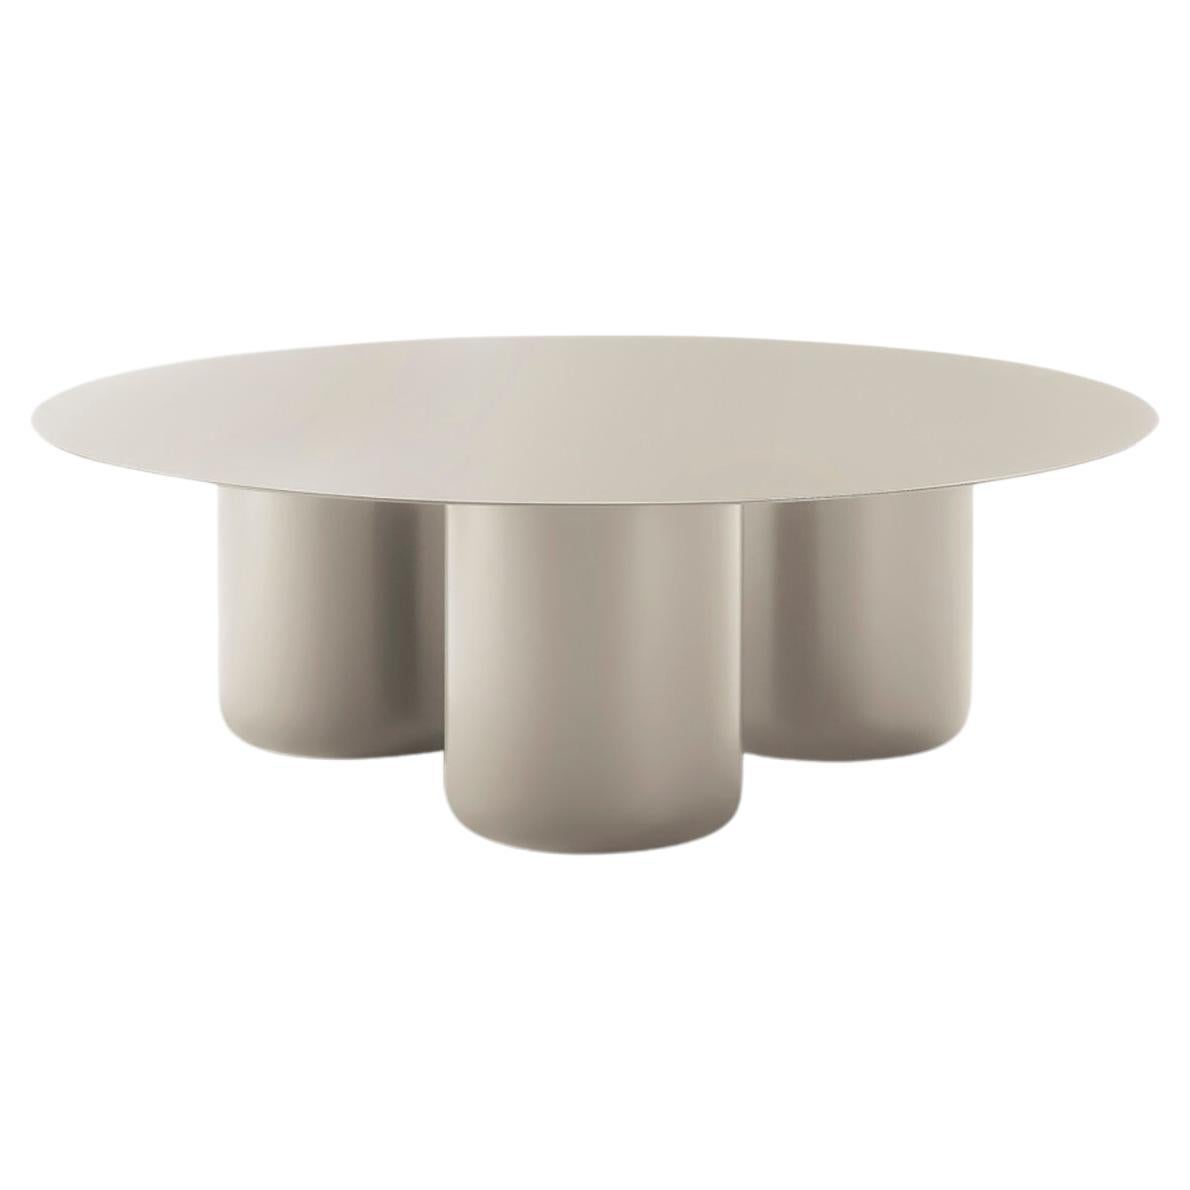 Surfmist Round Table by Coco Flip